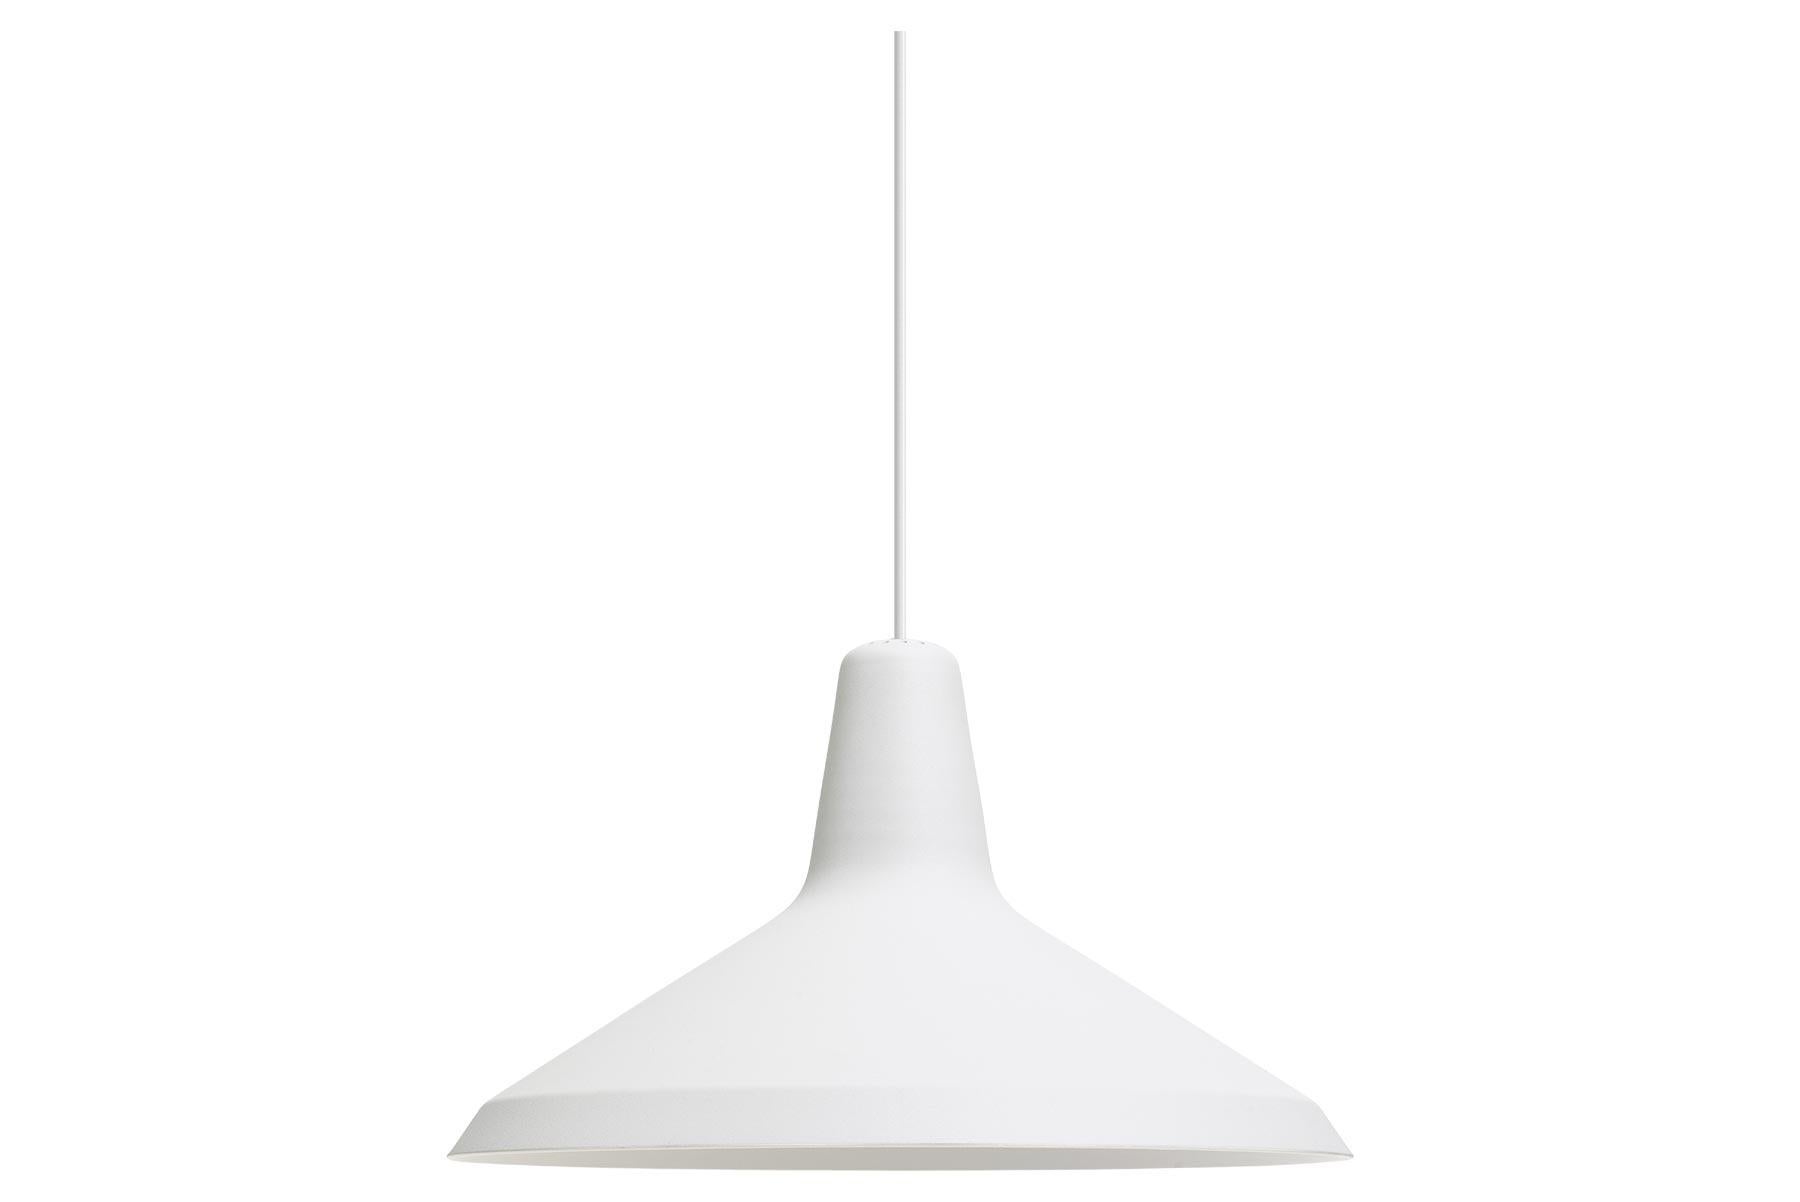 Designed in the 1950s by Greta M. Grossman, the G-10 Pendant is another of her undiscovered designs. The pendant is characterized by its Industrial look with a rough surfaced lampshade and clean lines, but at the same time holds a soft, feminine and